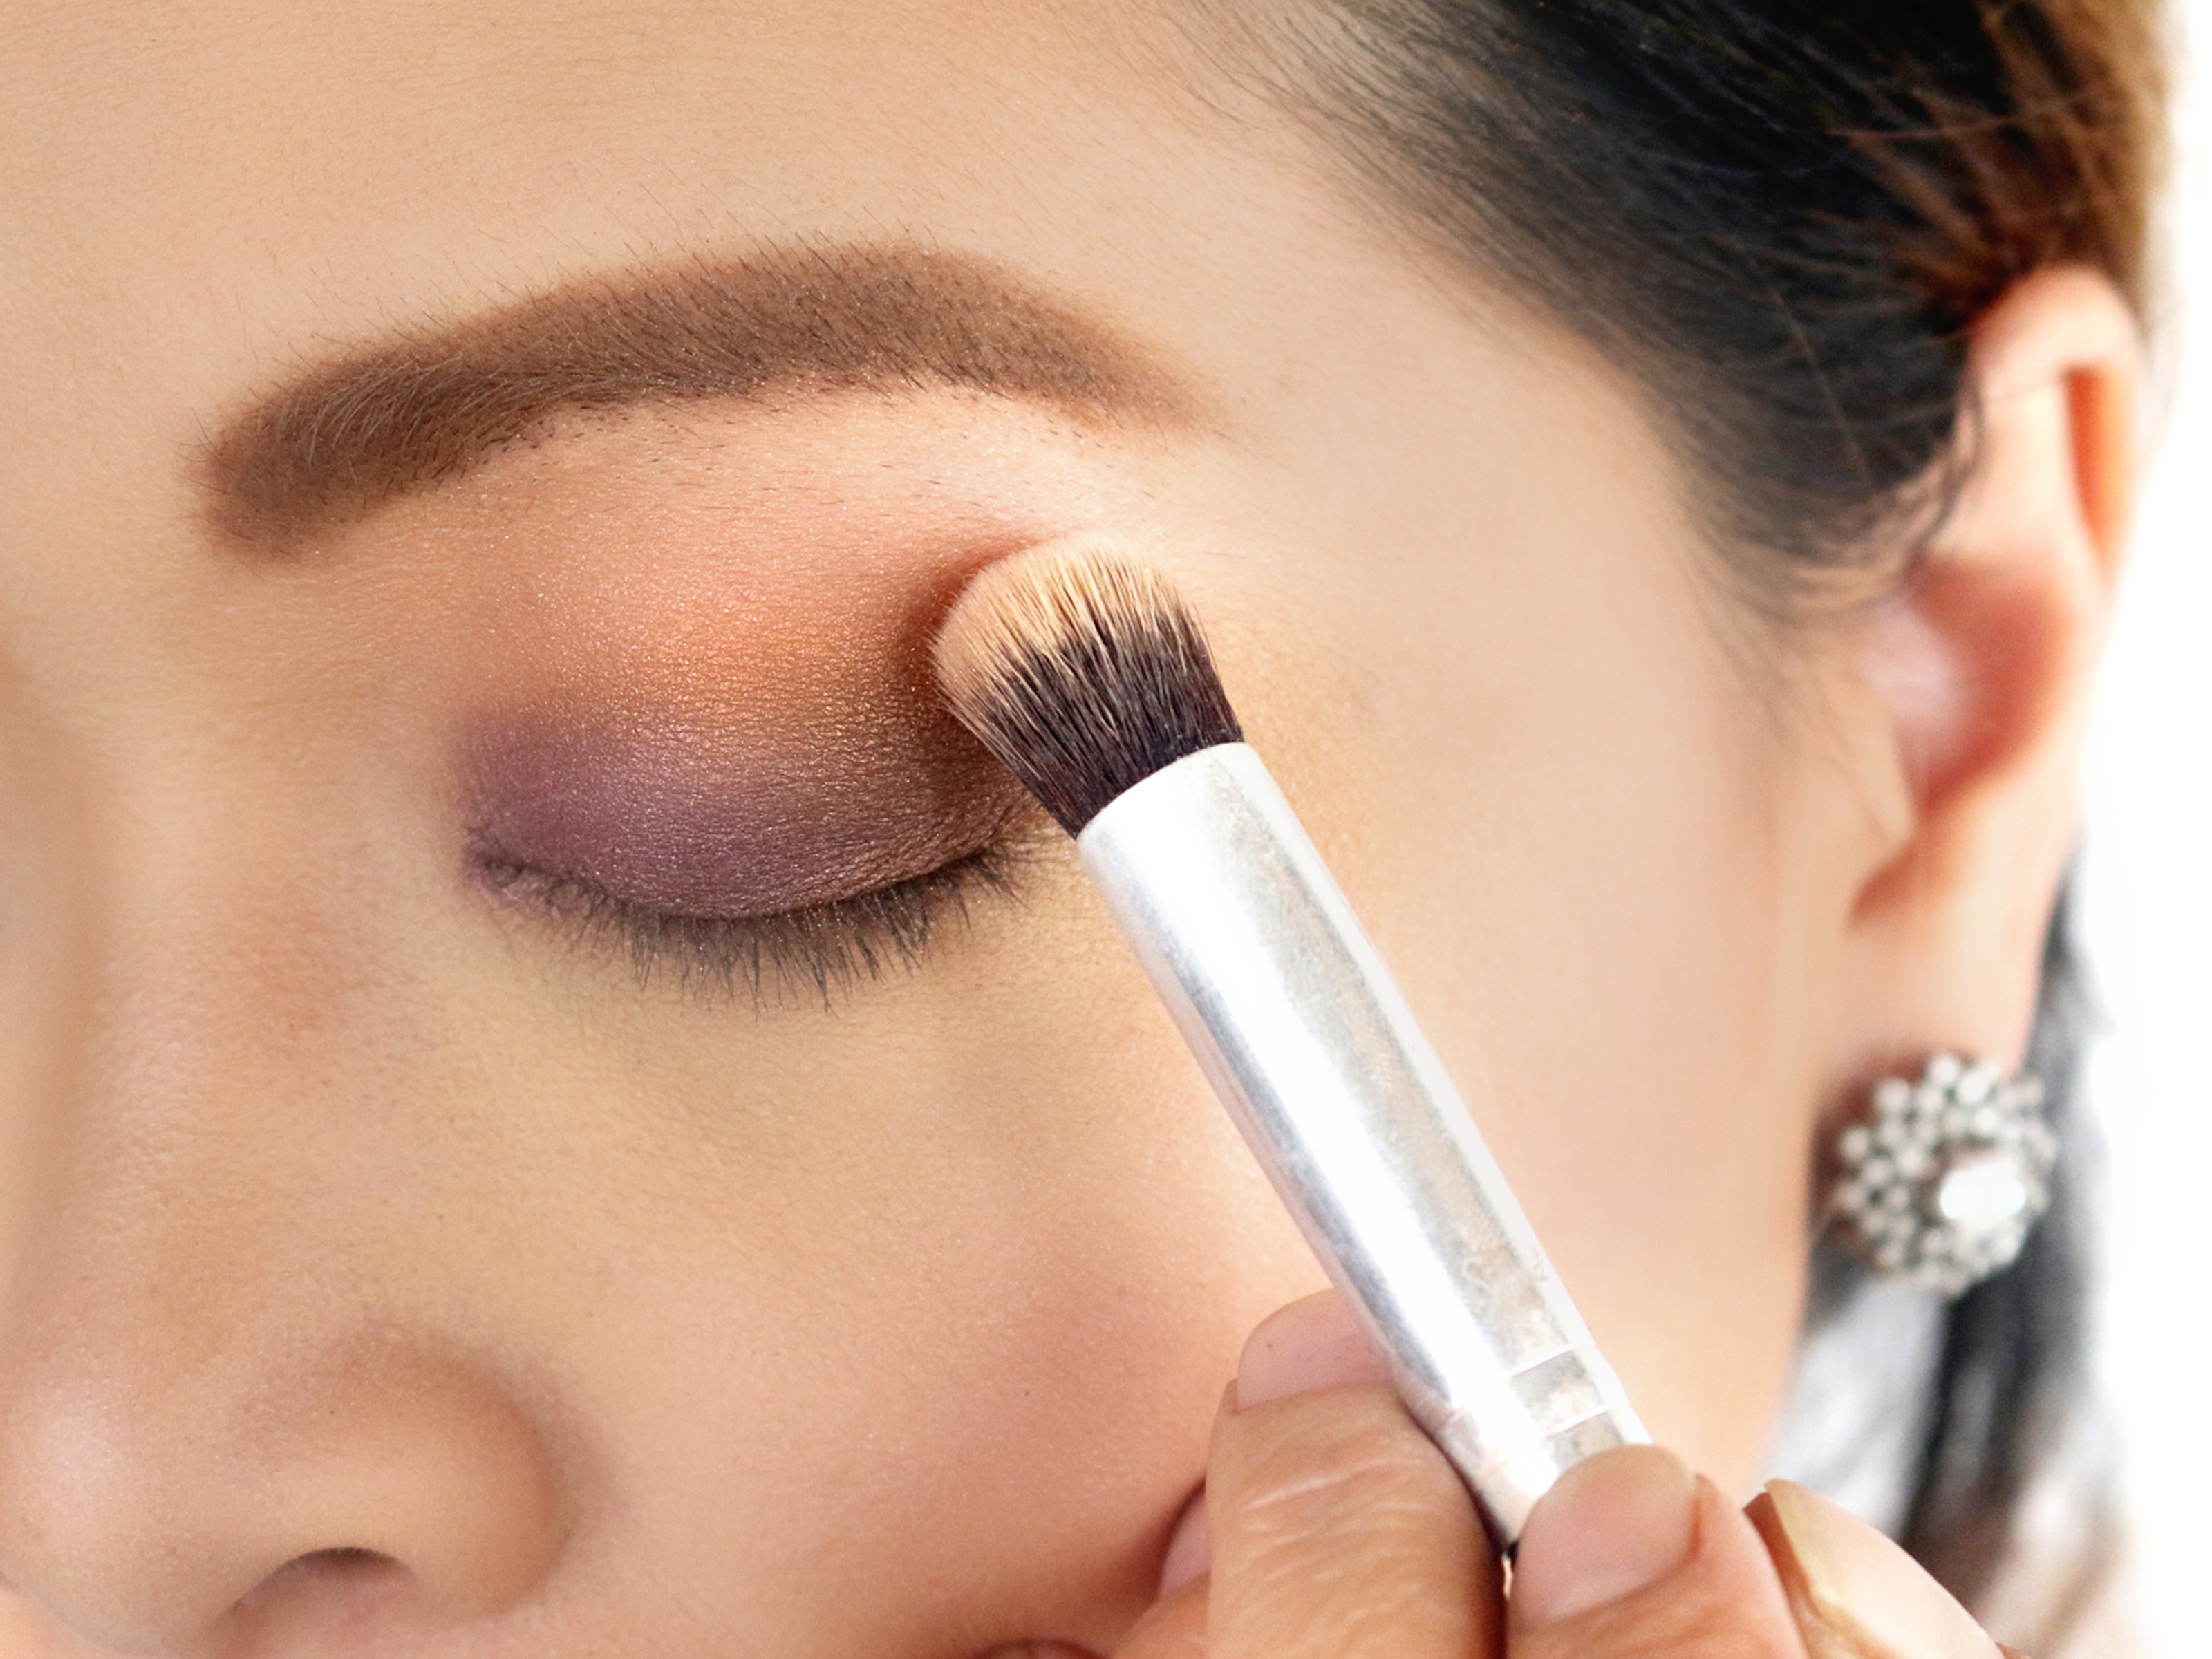 Makeup To Make Grey Eyes Pop How To Find The Best Eyeshadow For Your Eyes 11 Steps